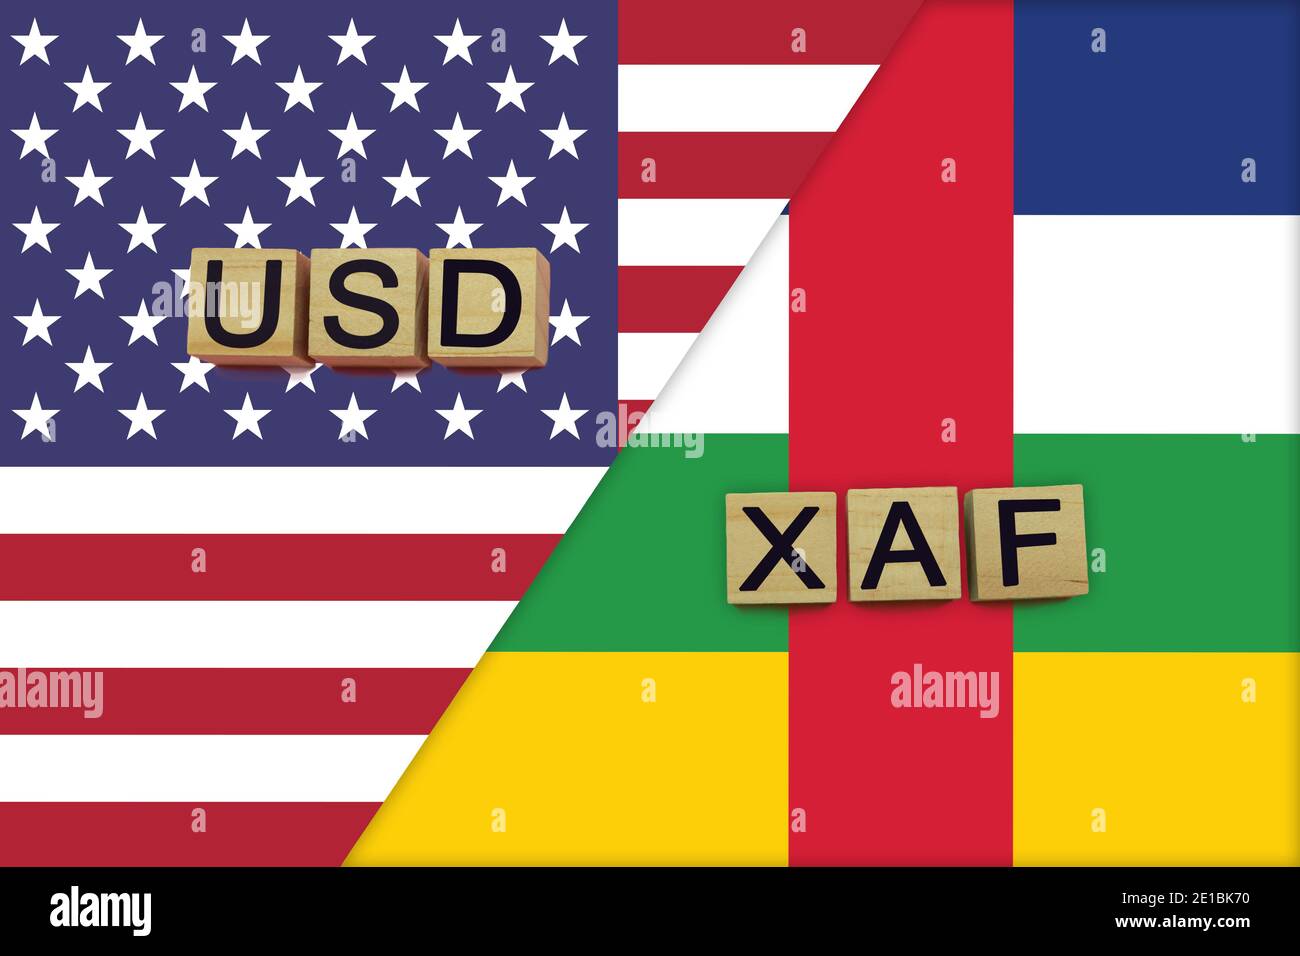 USA and Central African Republic currencies codes on national flags background. International money transfer concept Stock Photo